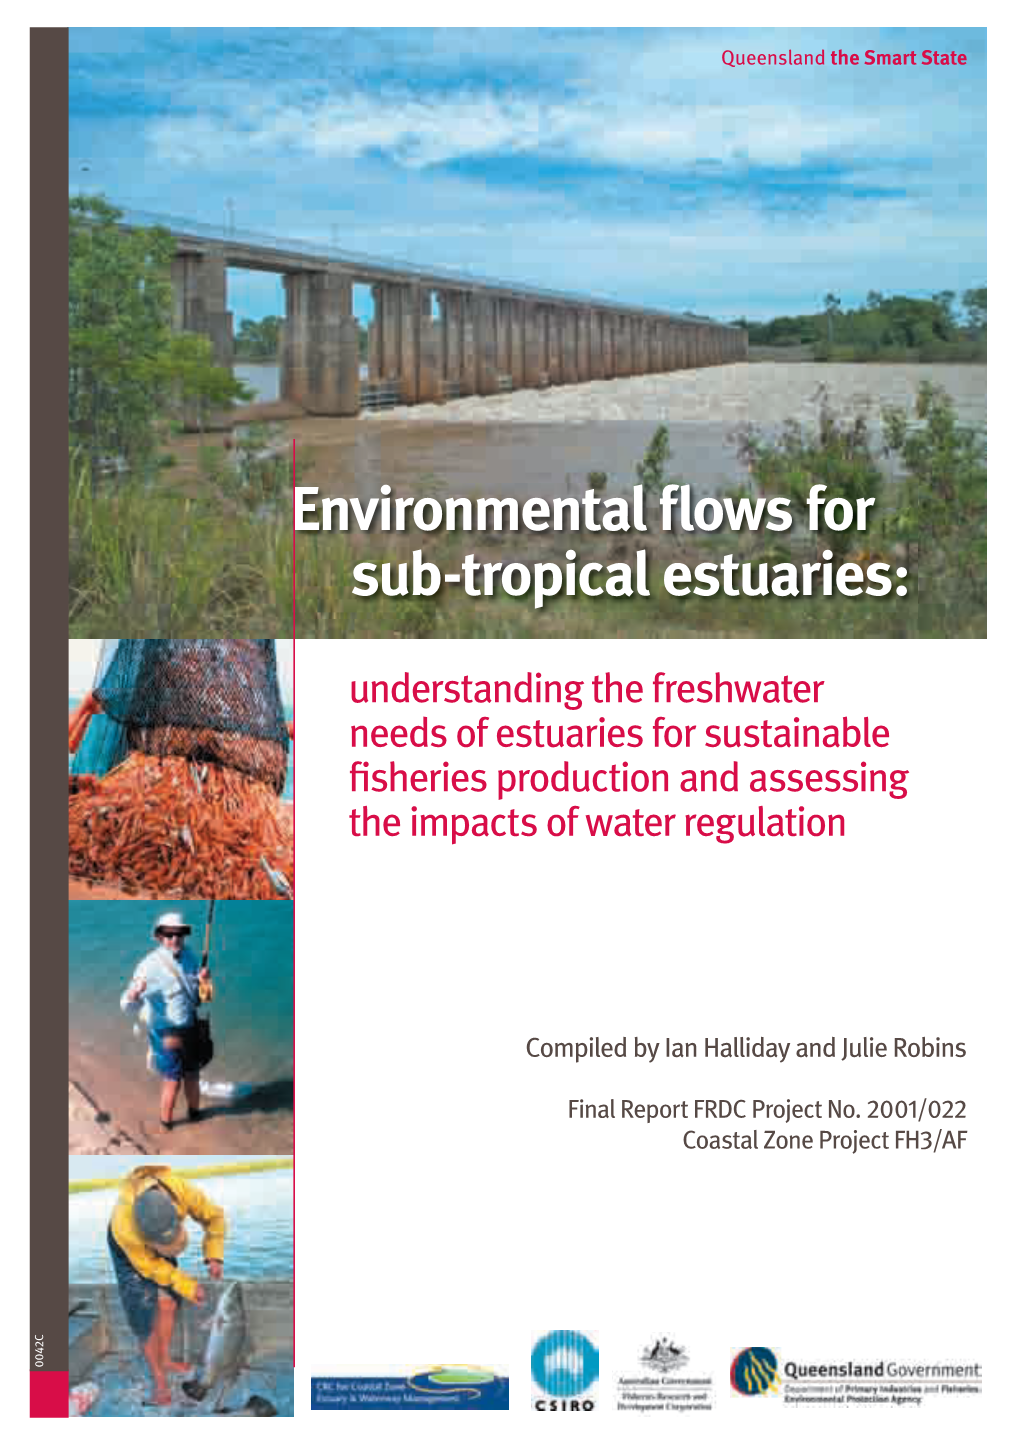 Environmental Flows for Sub-Tropical Estuaries: Understanding the Freshwater Needs for Sustainable Fisheries Production and Assessing the Impacts of Water Regulation